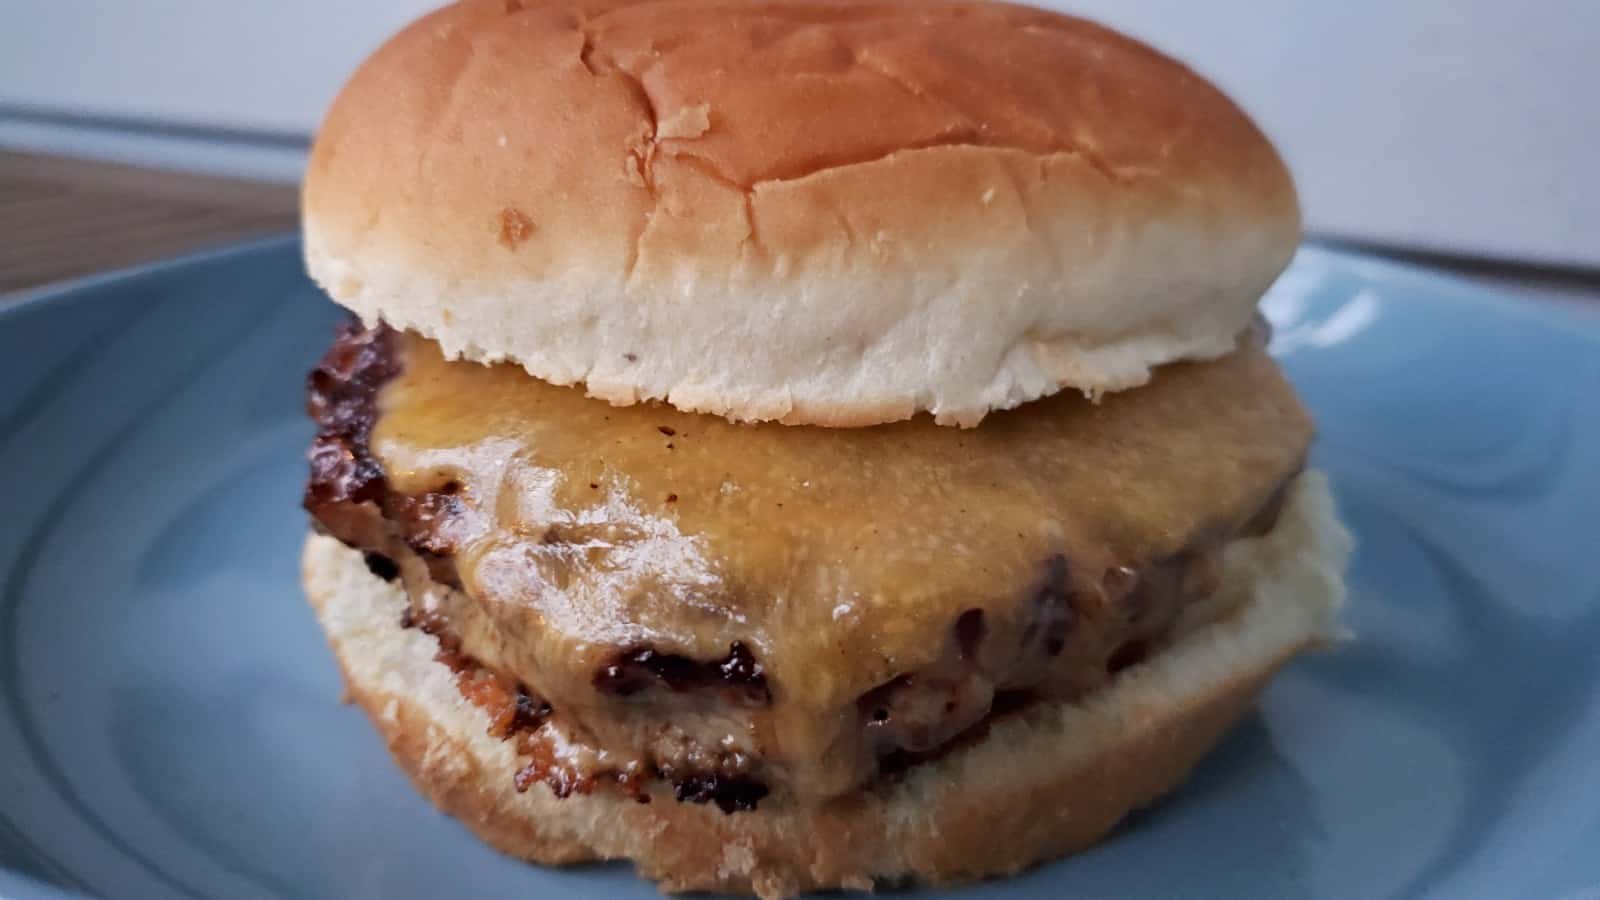 Image shows Asian inspired turkey burger on a blue plate.